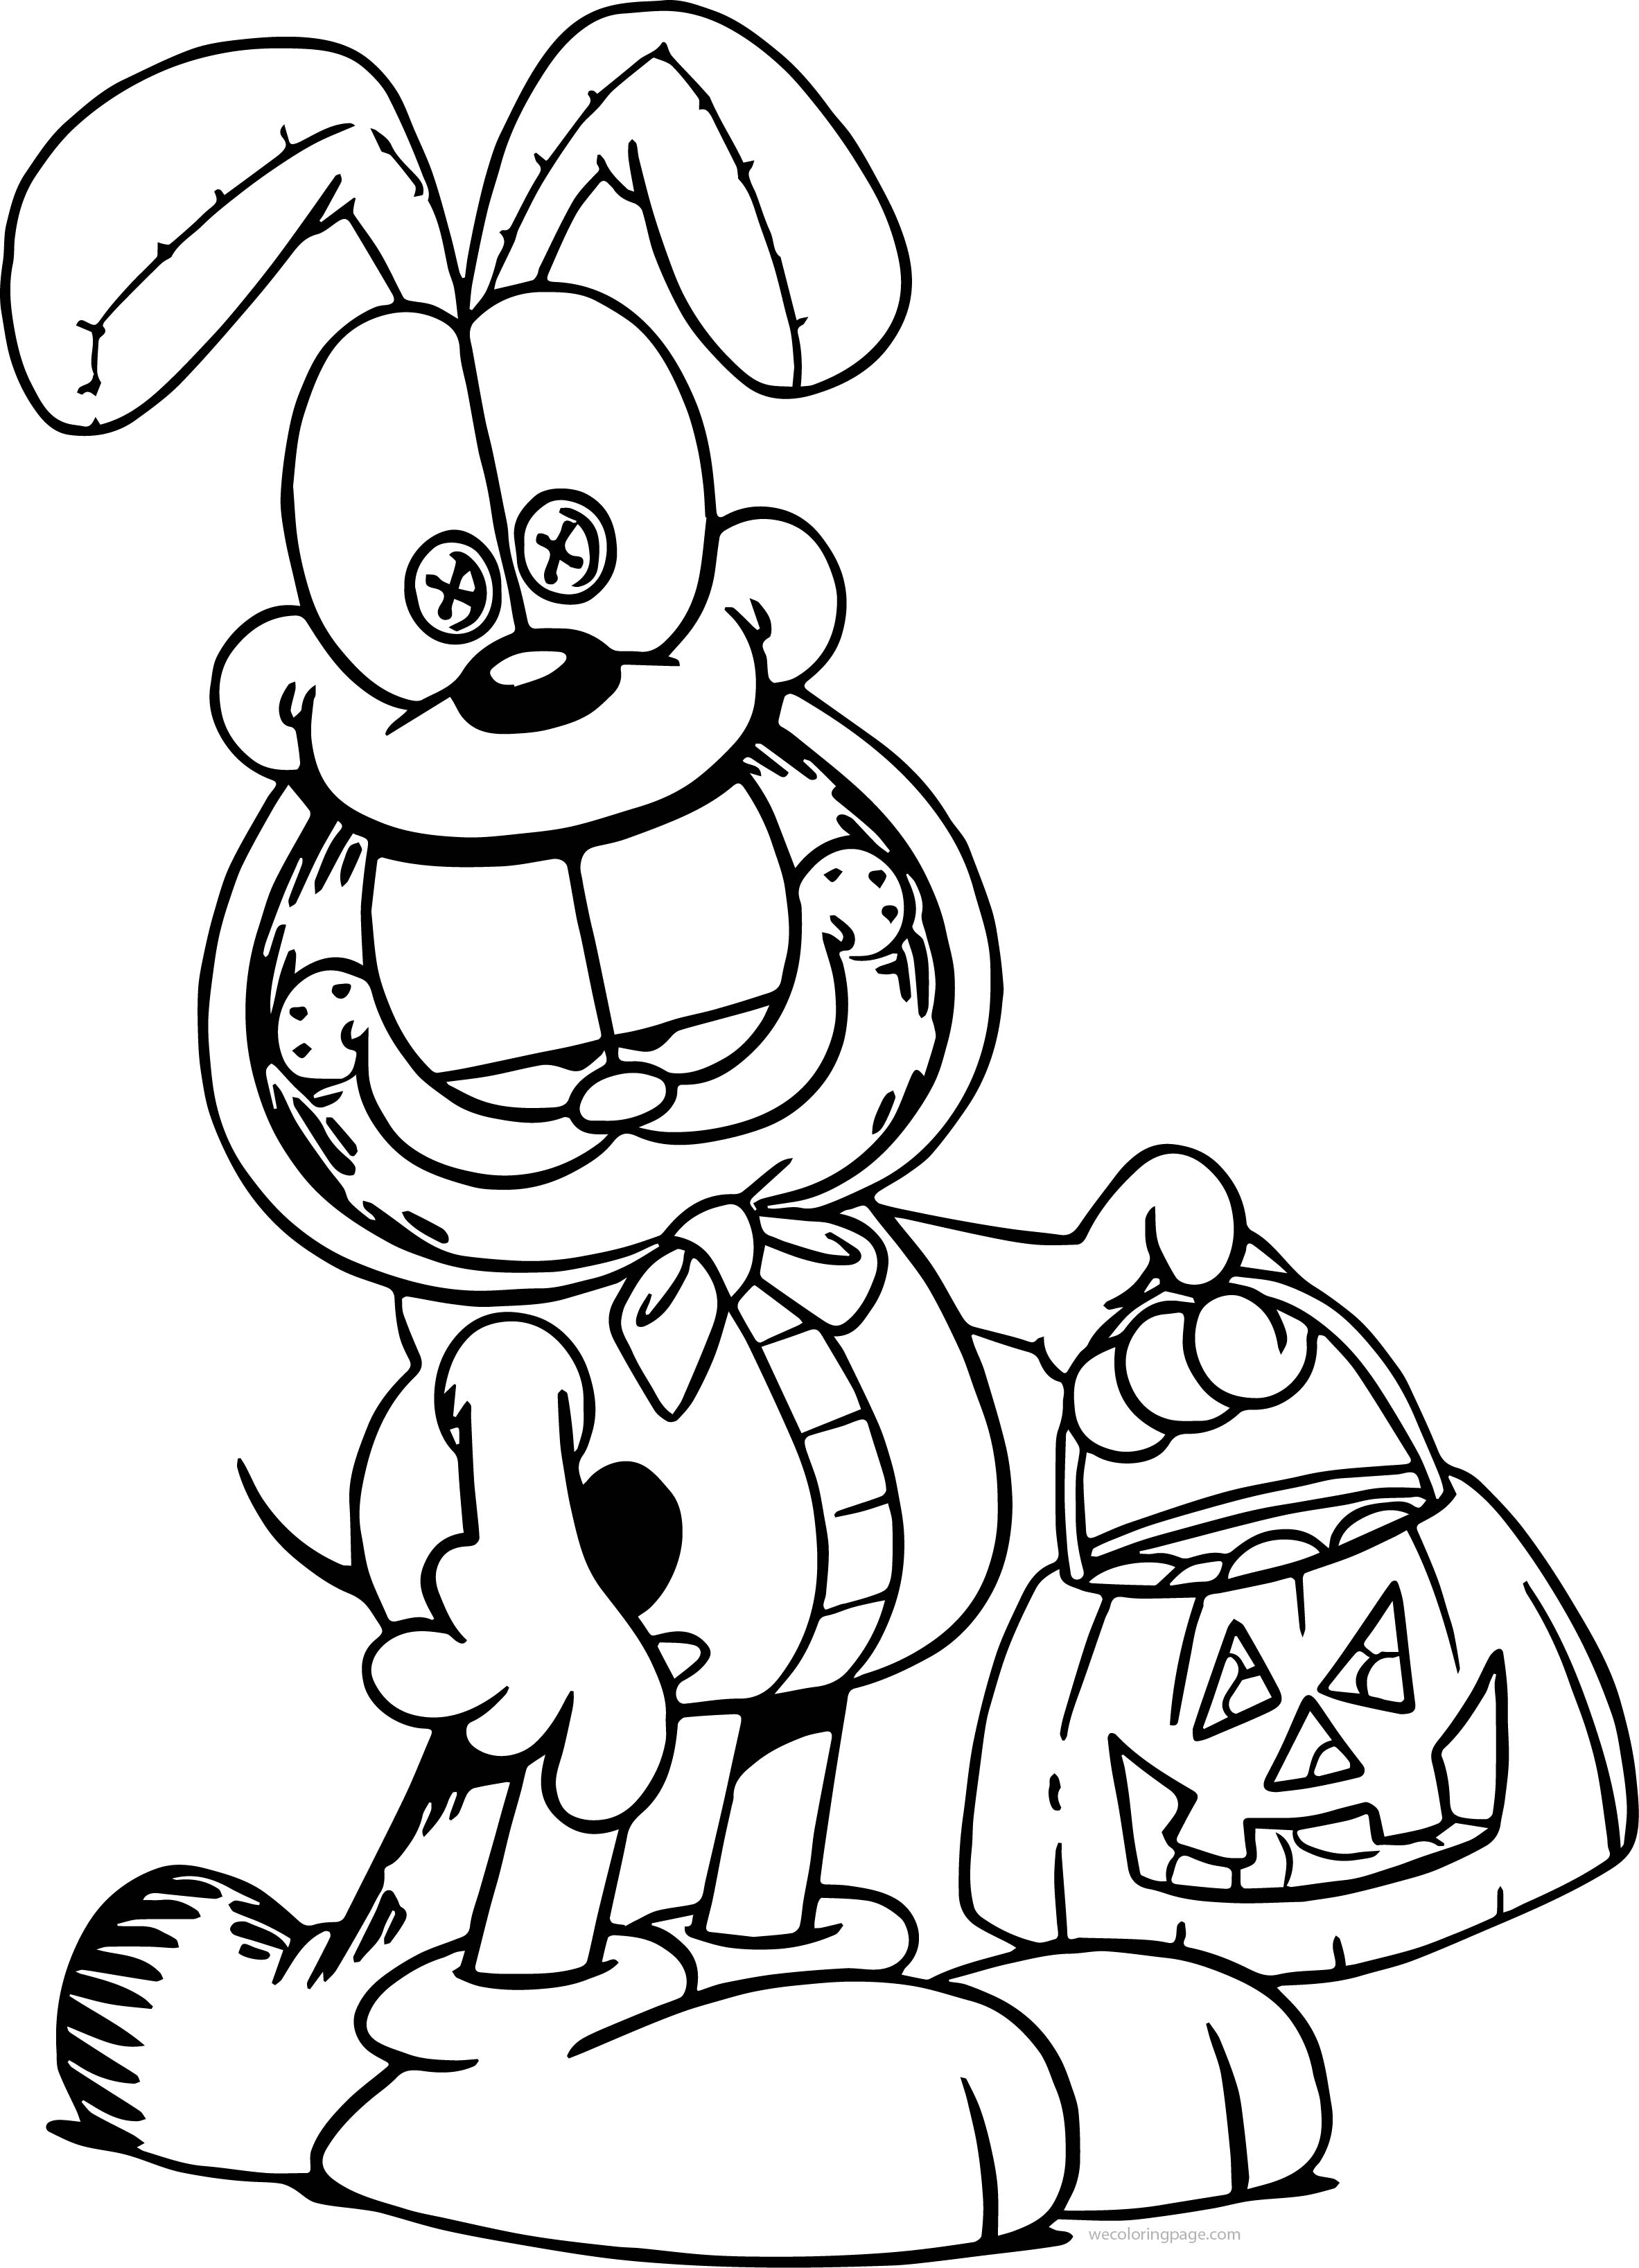 Garfield Printable Coloring Pages - Printable Coloring Pages